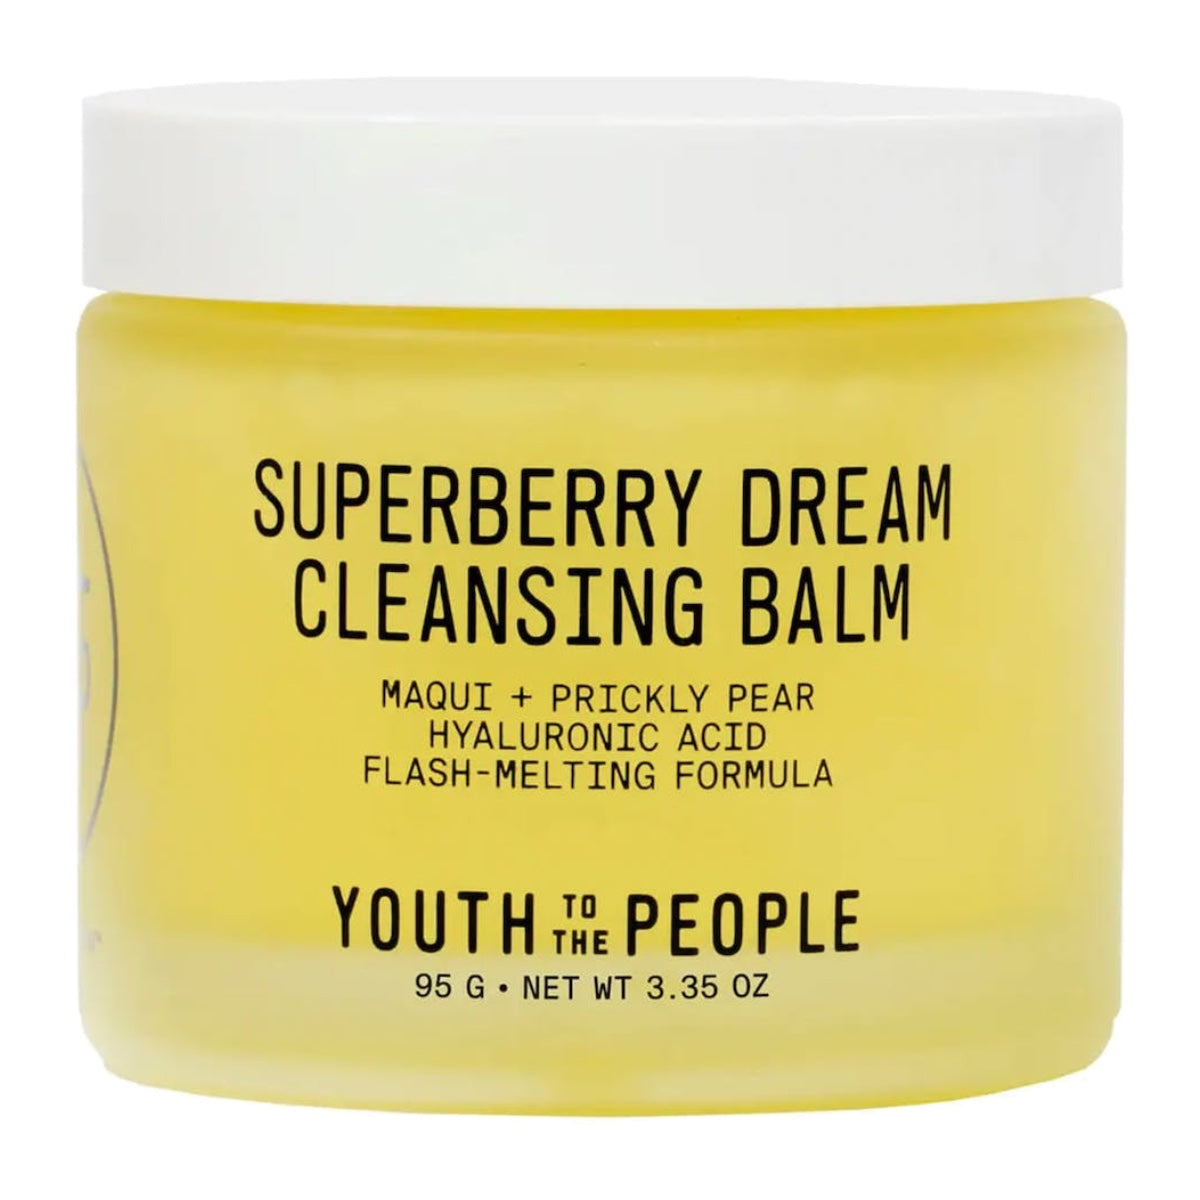 Youth To The People Superberry Dream Cleansing Balm 95 g